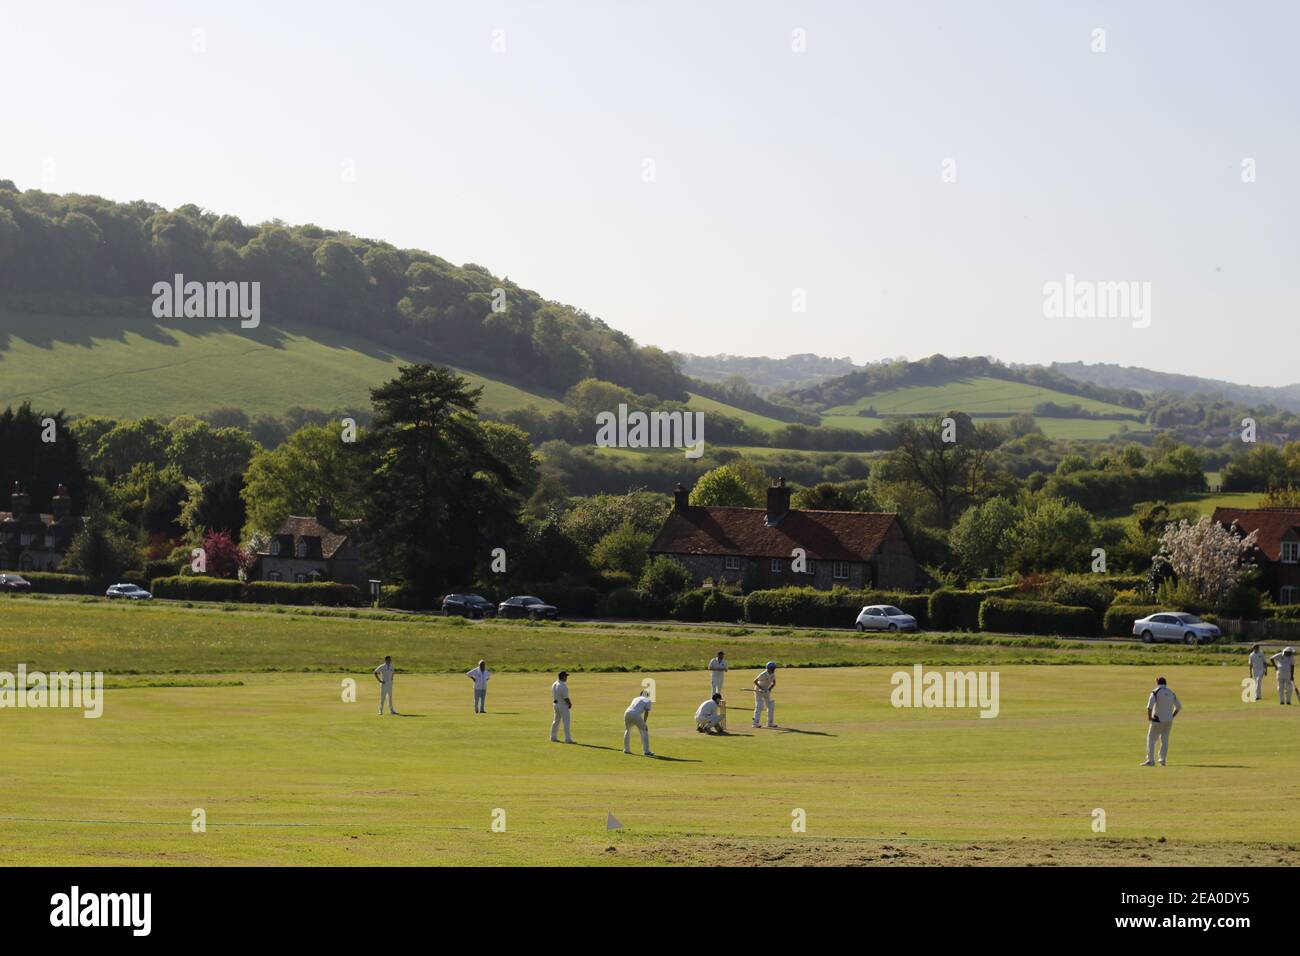 Cricket players in England Stock Photo